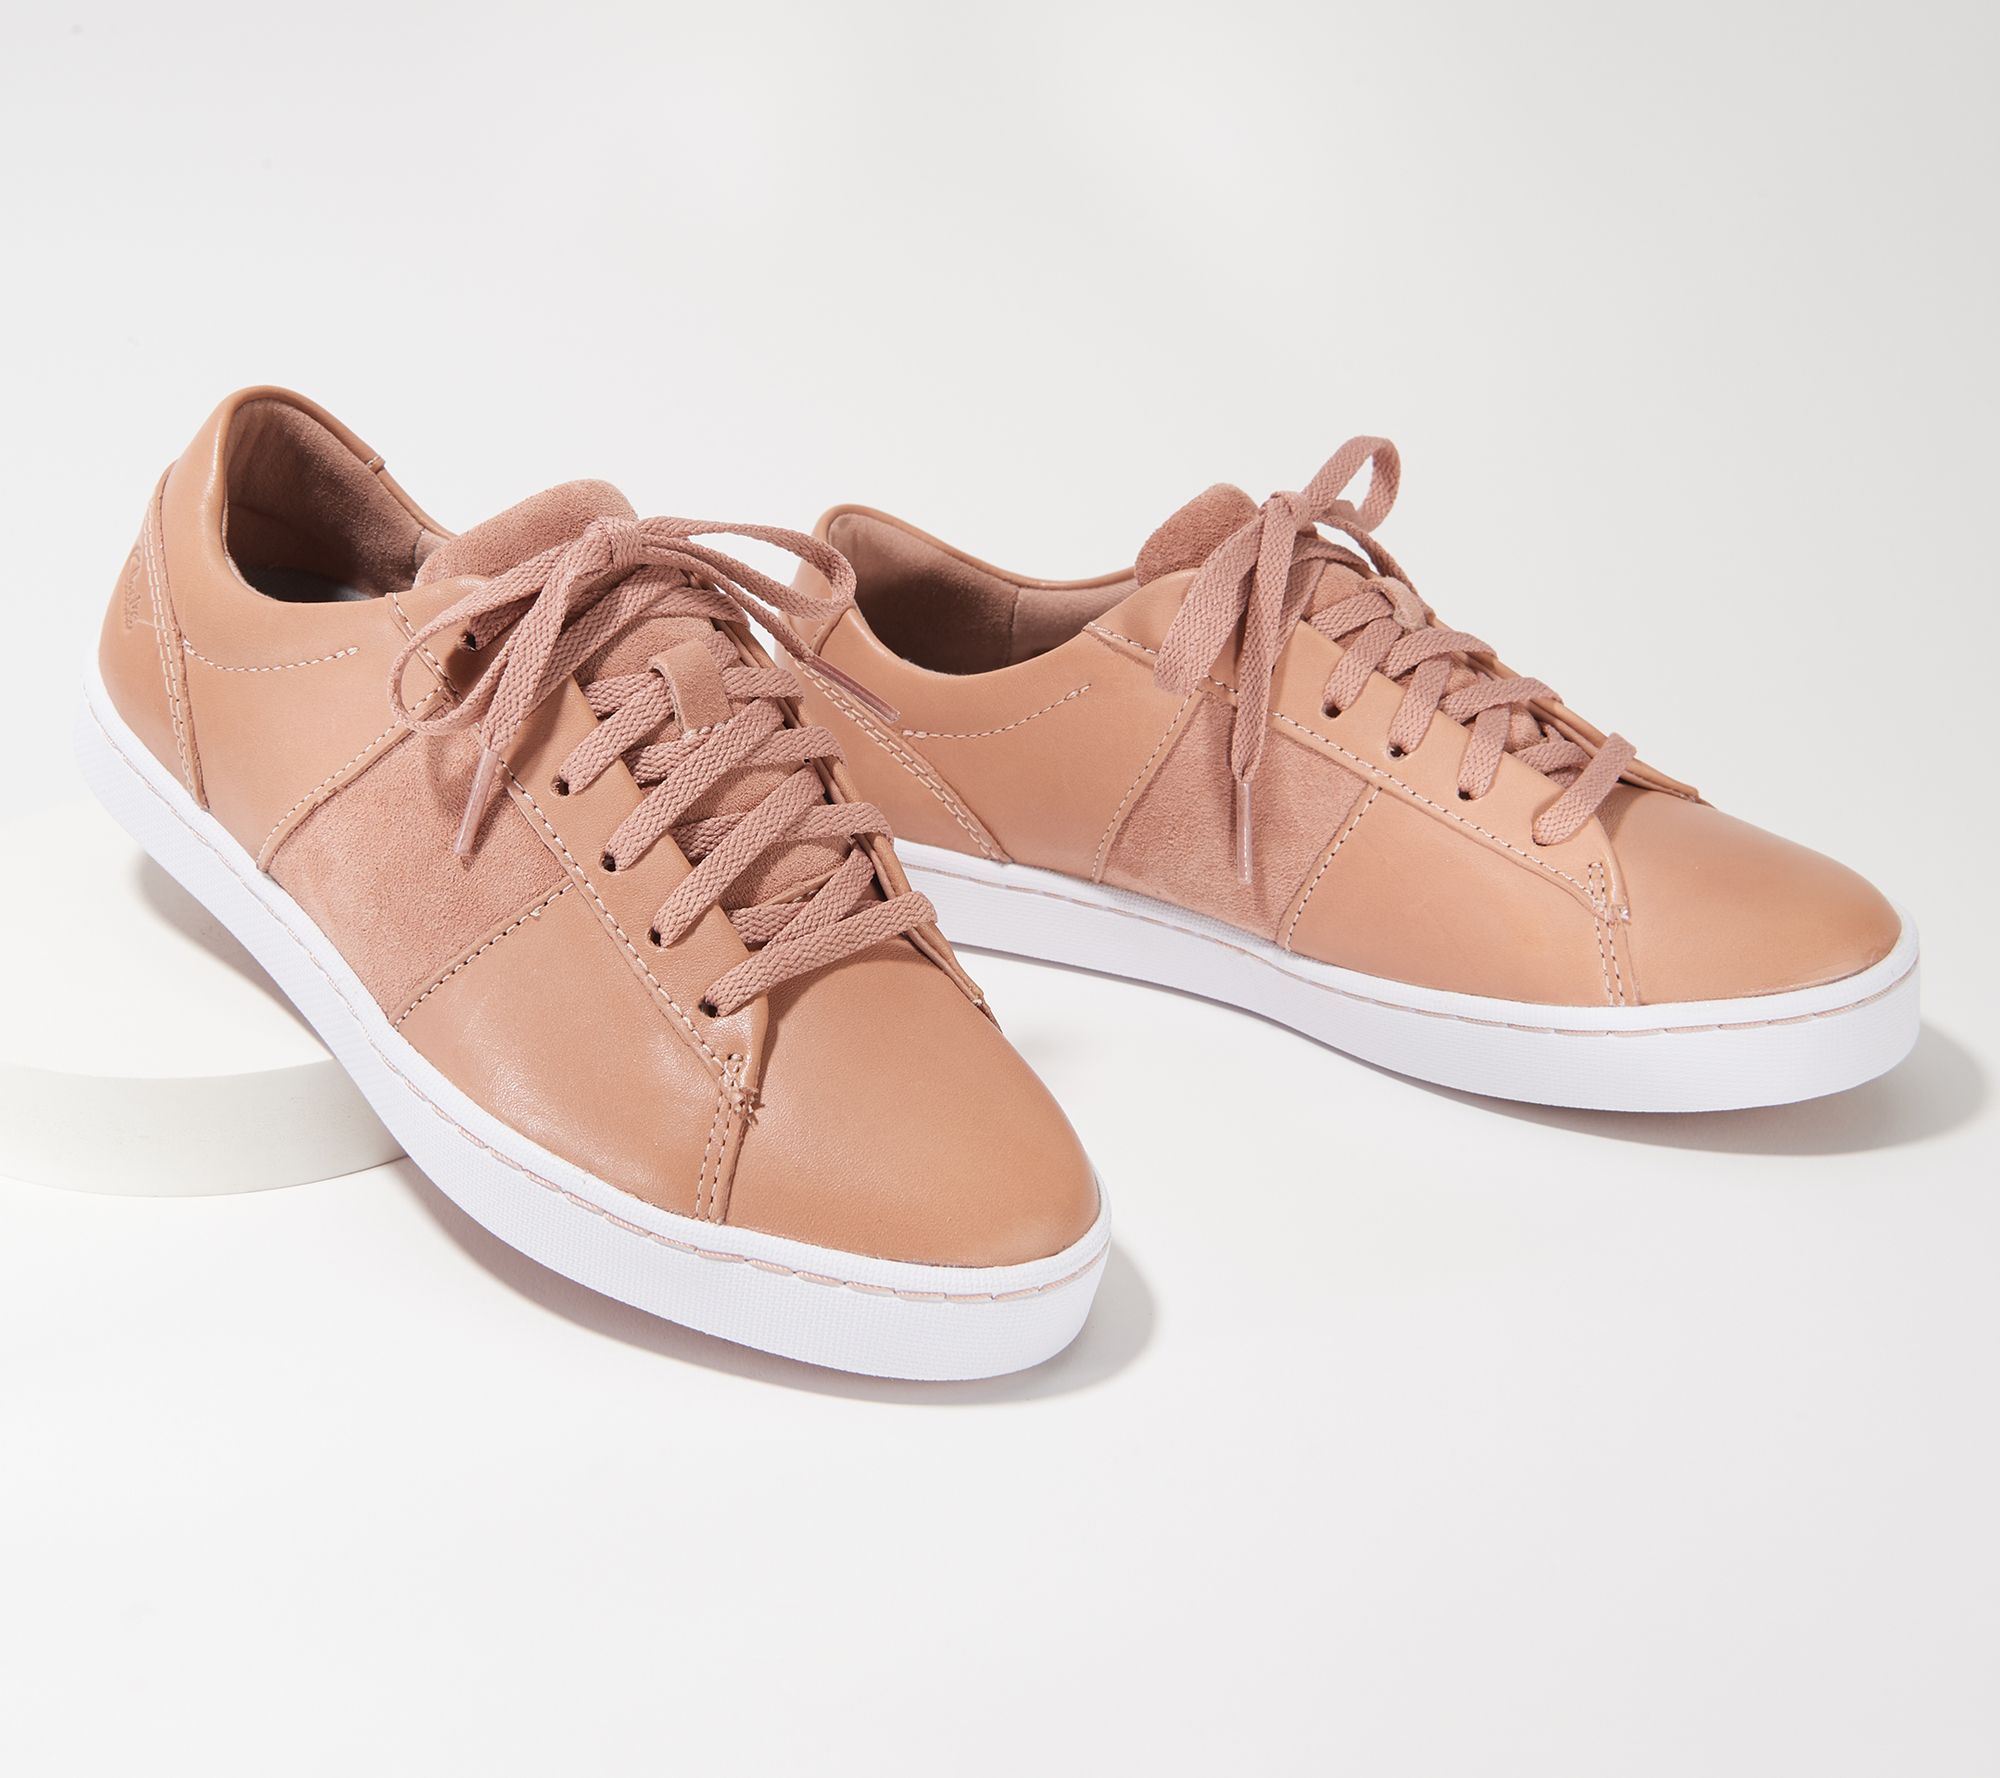 clark leather sneakers